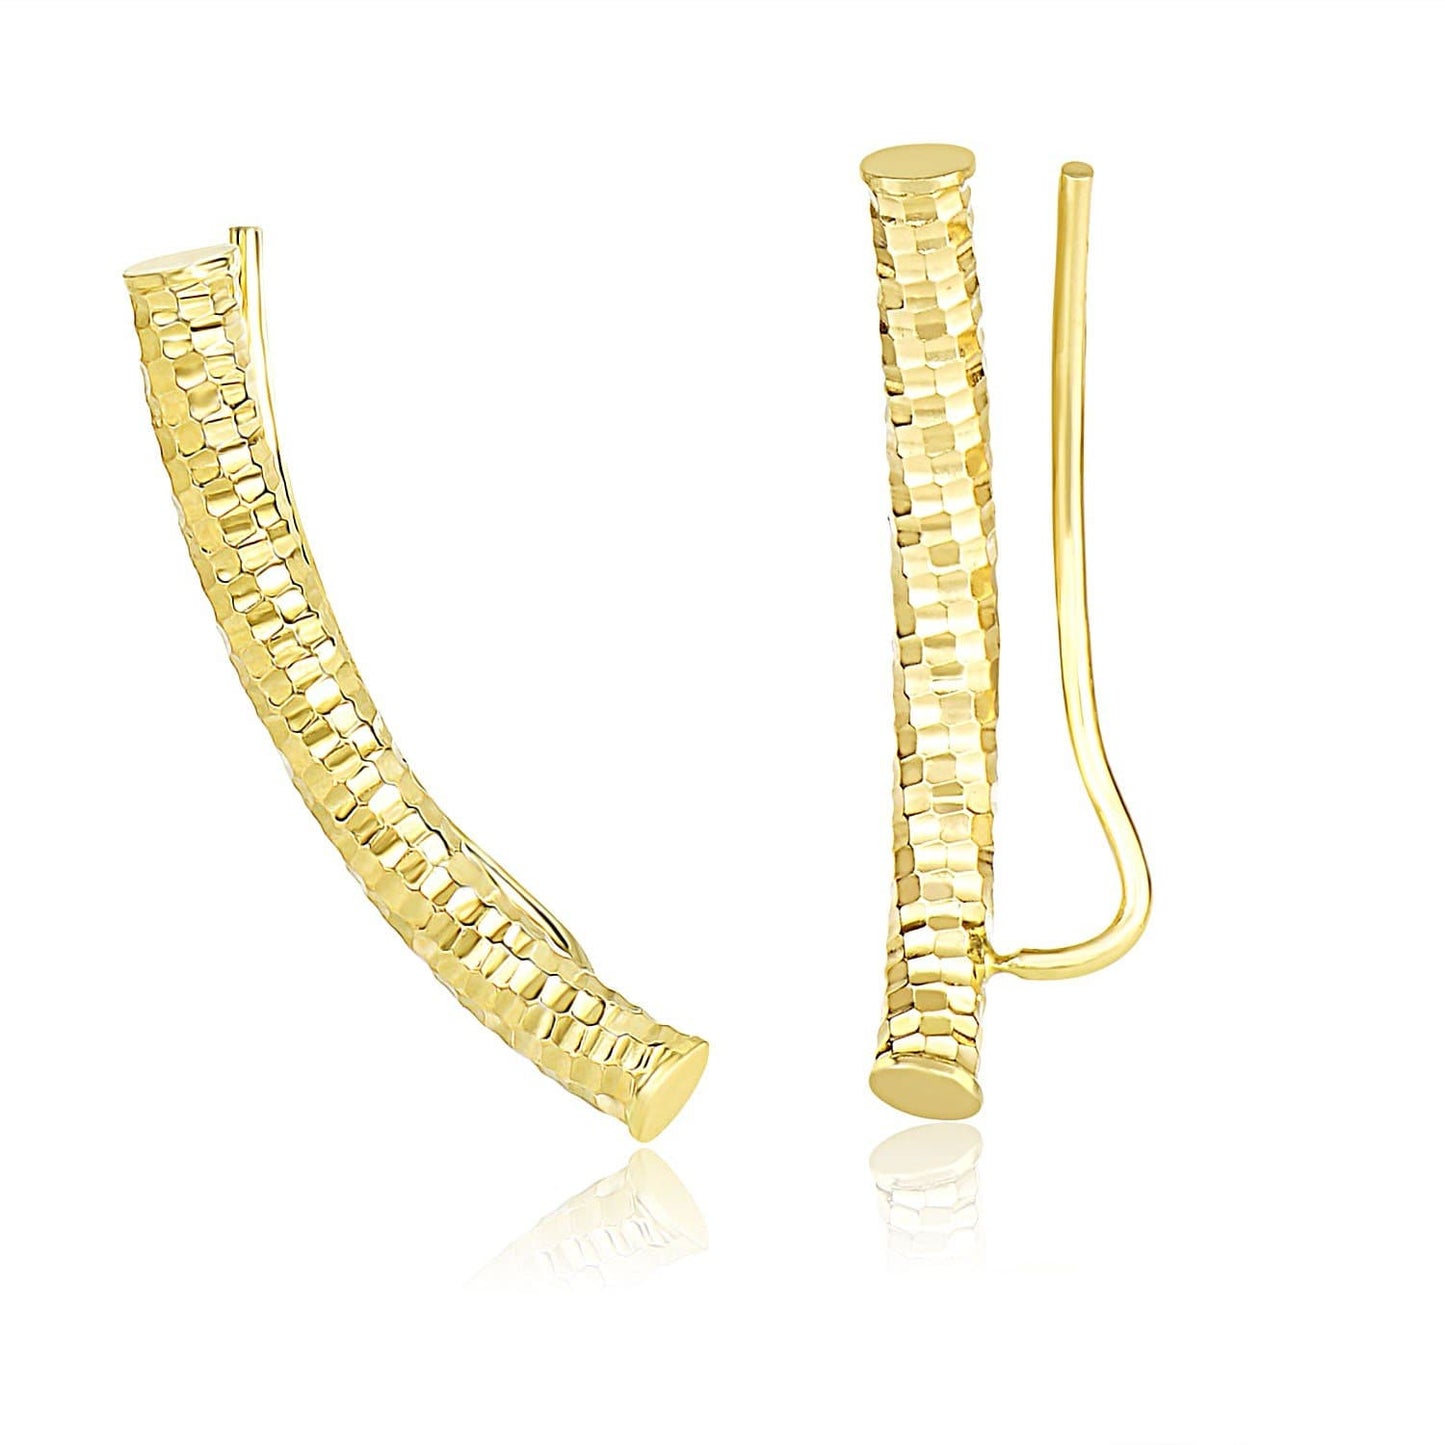 14k Yellow Gold Curved Tube Earrings with Diamond Cuts